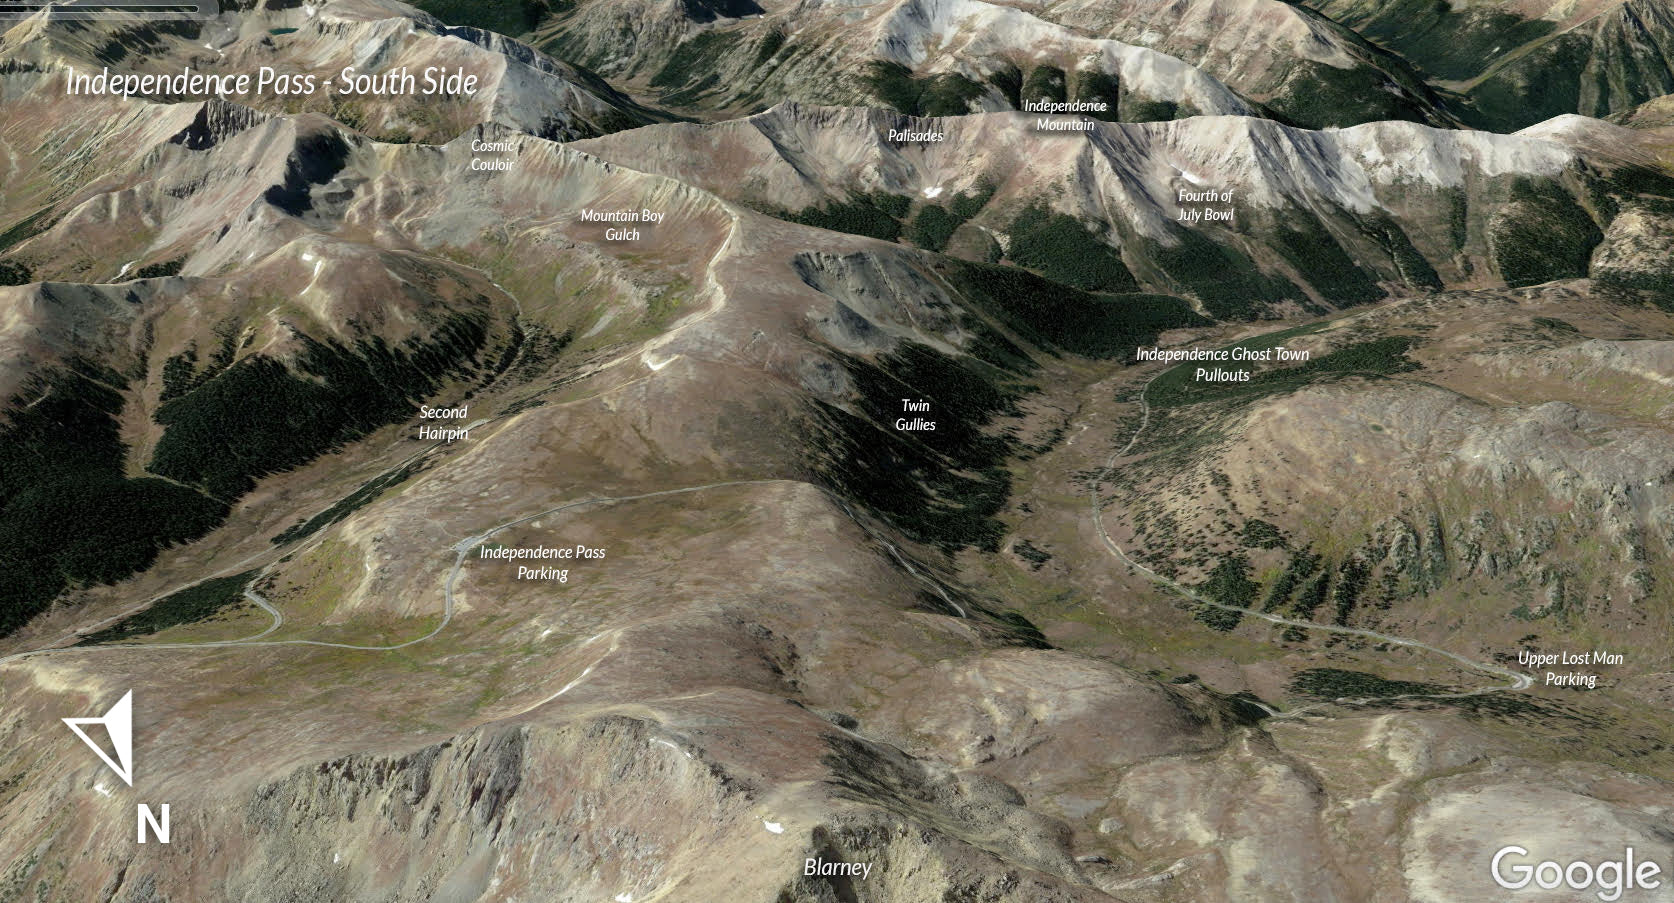 Google Earth view of Independence Pass South